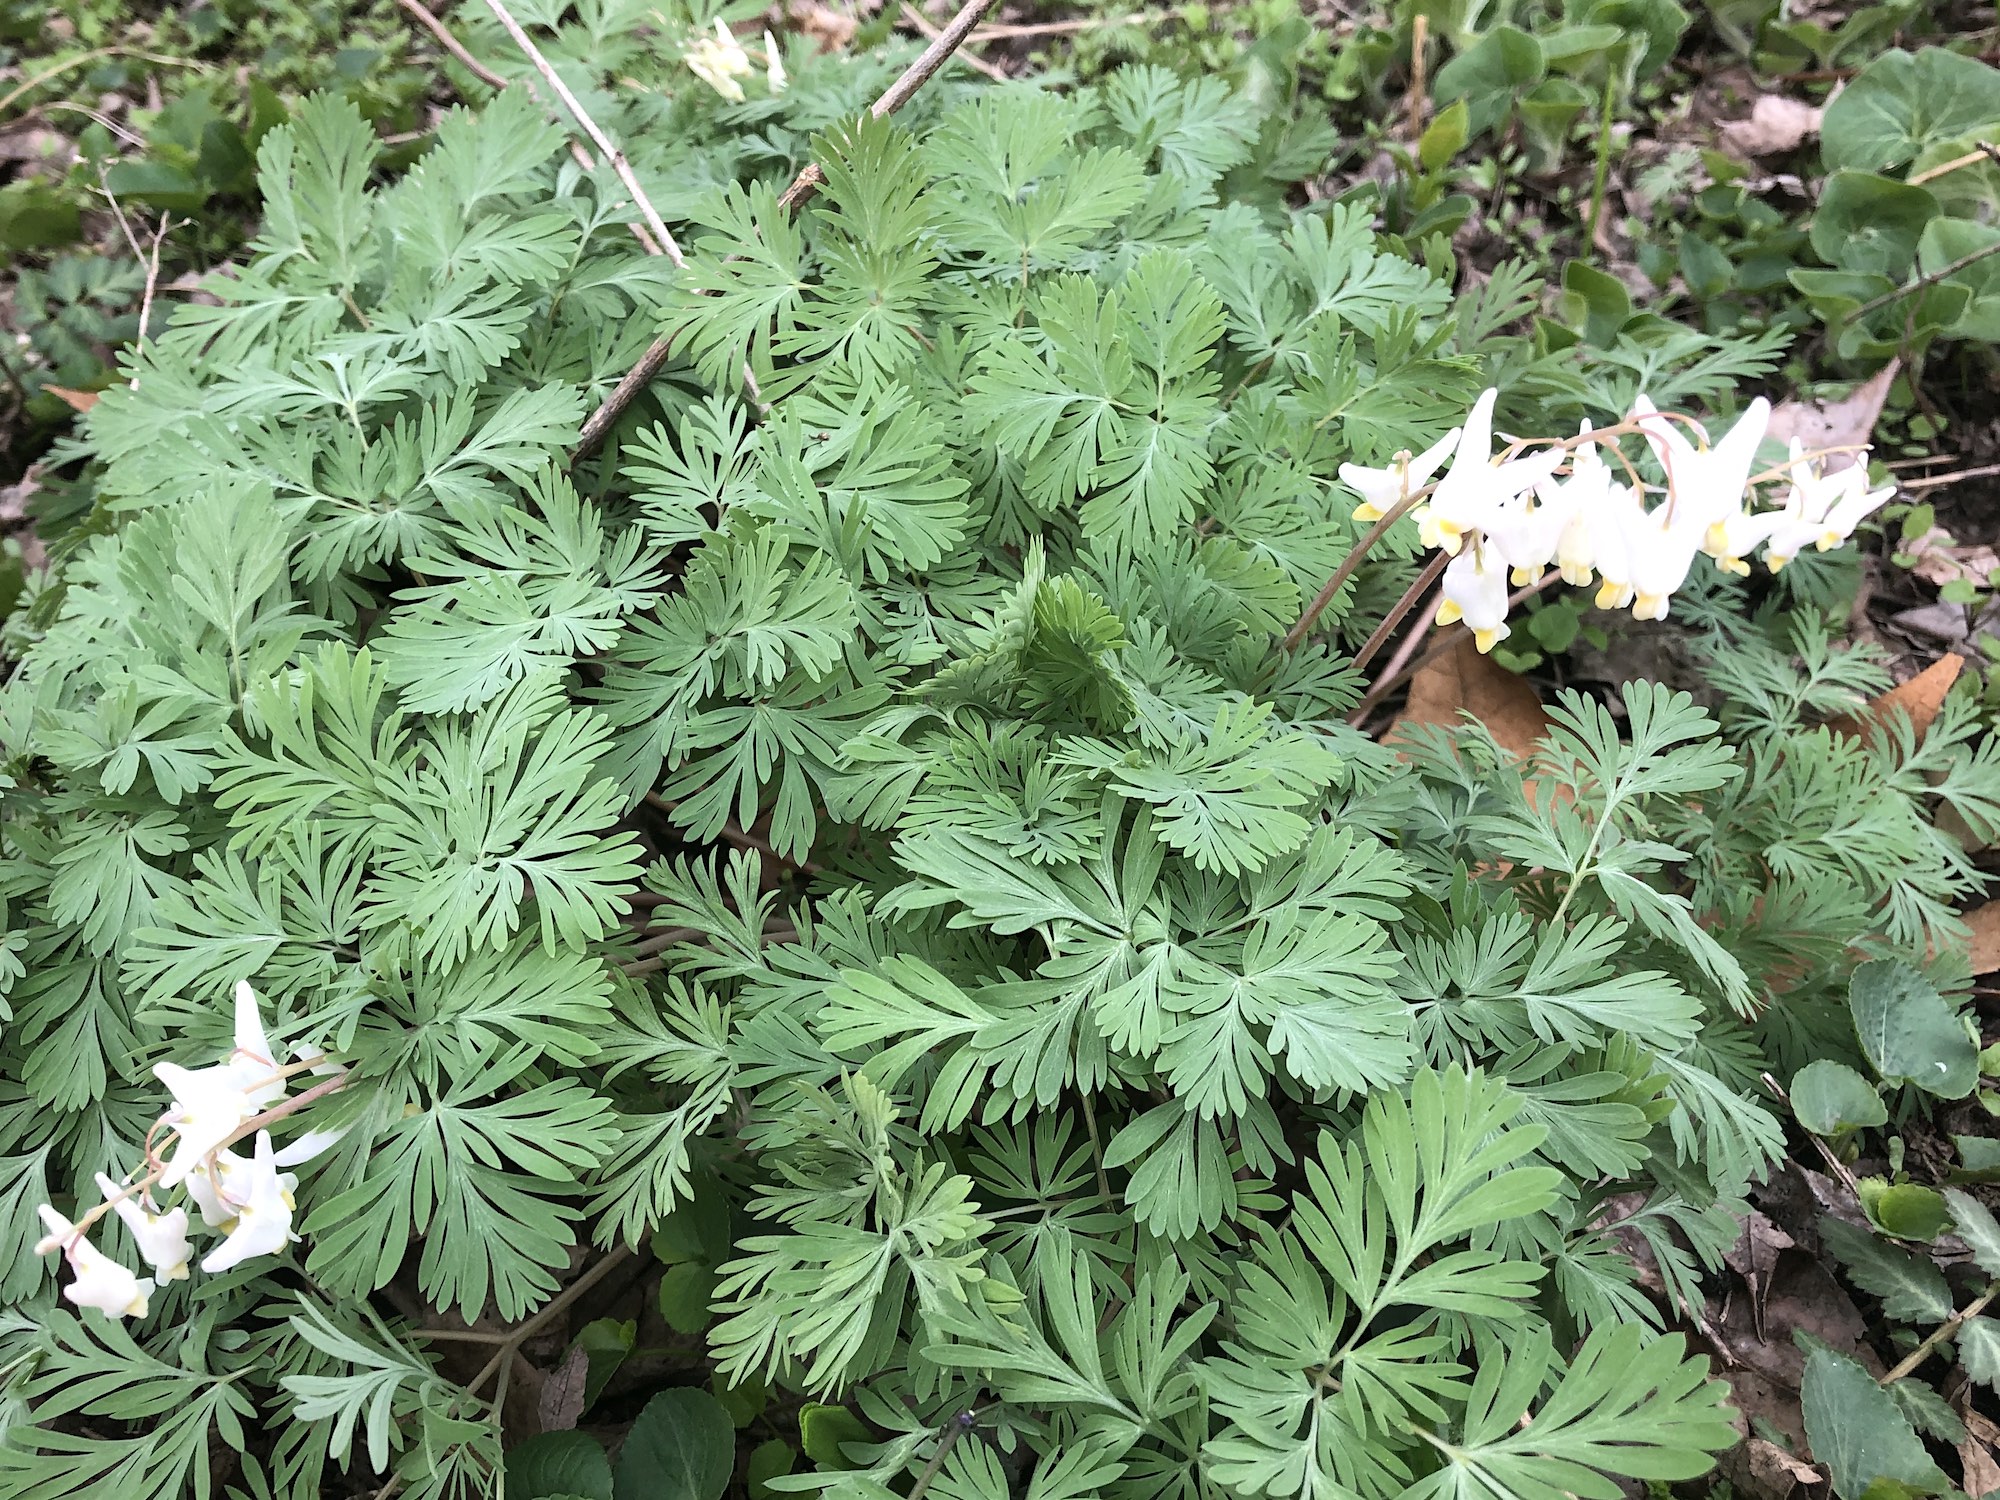 Dutchman's Breeches on April 22, 2019 by Duck Pond.